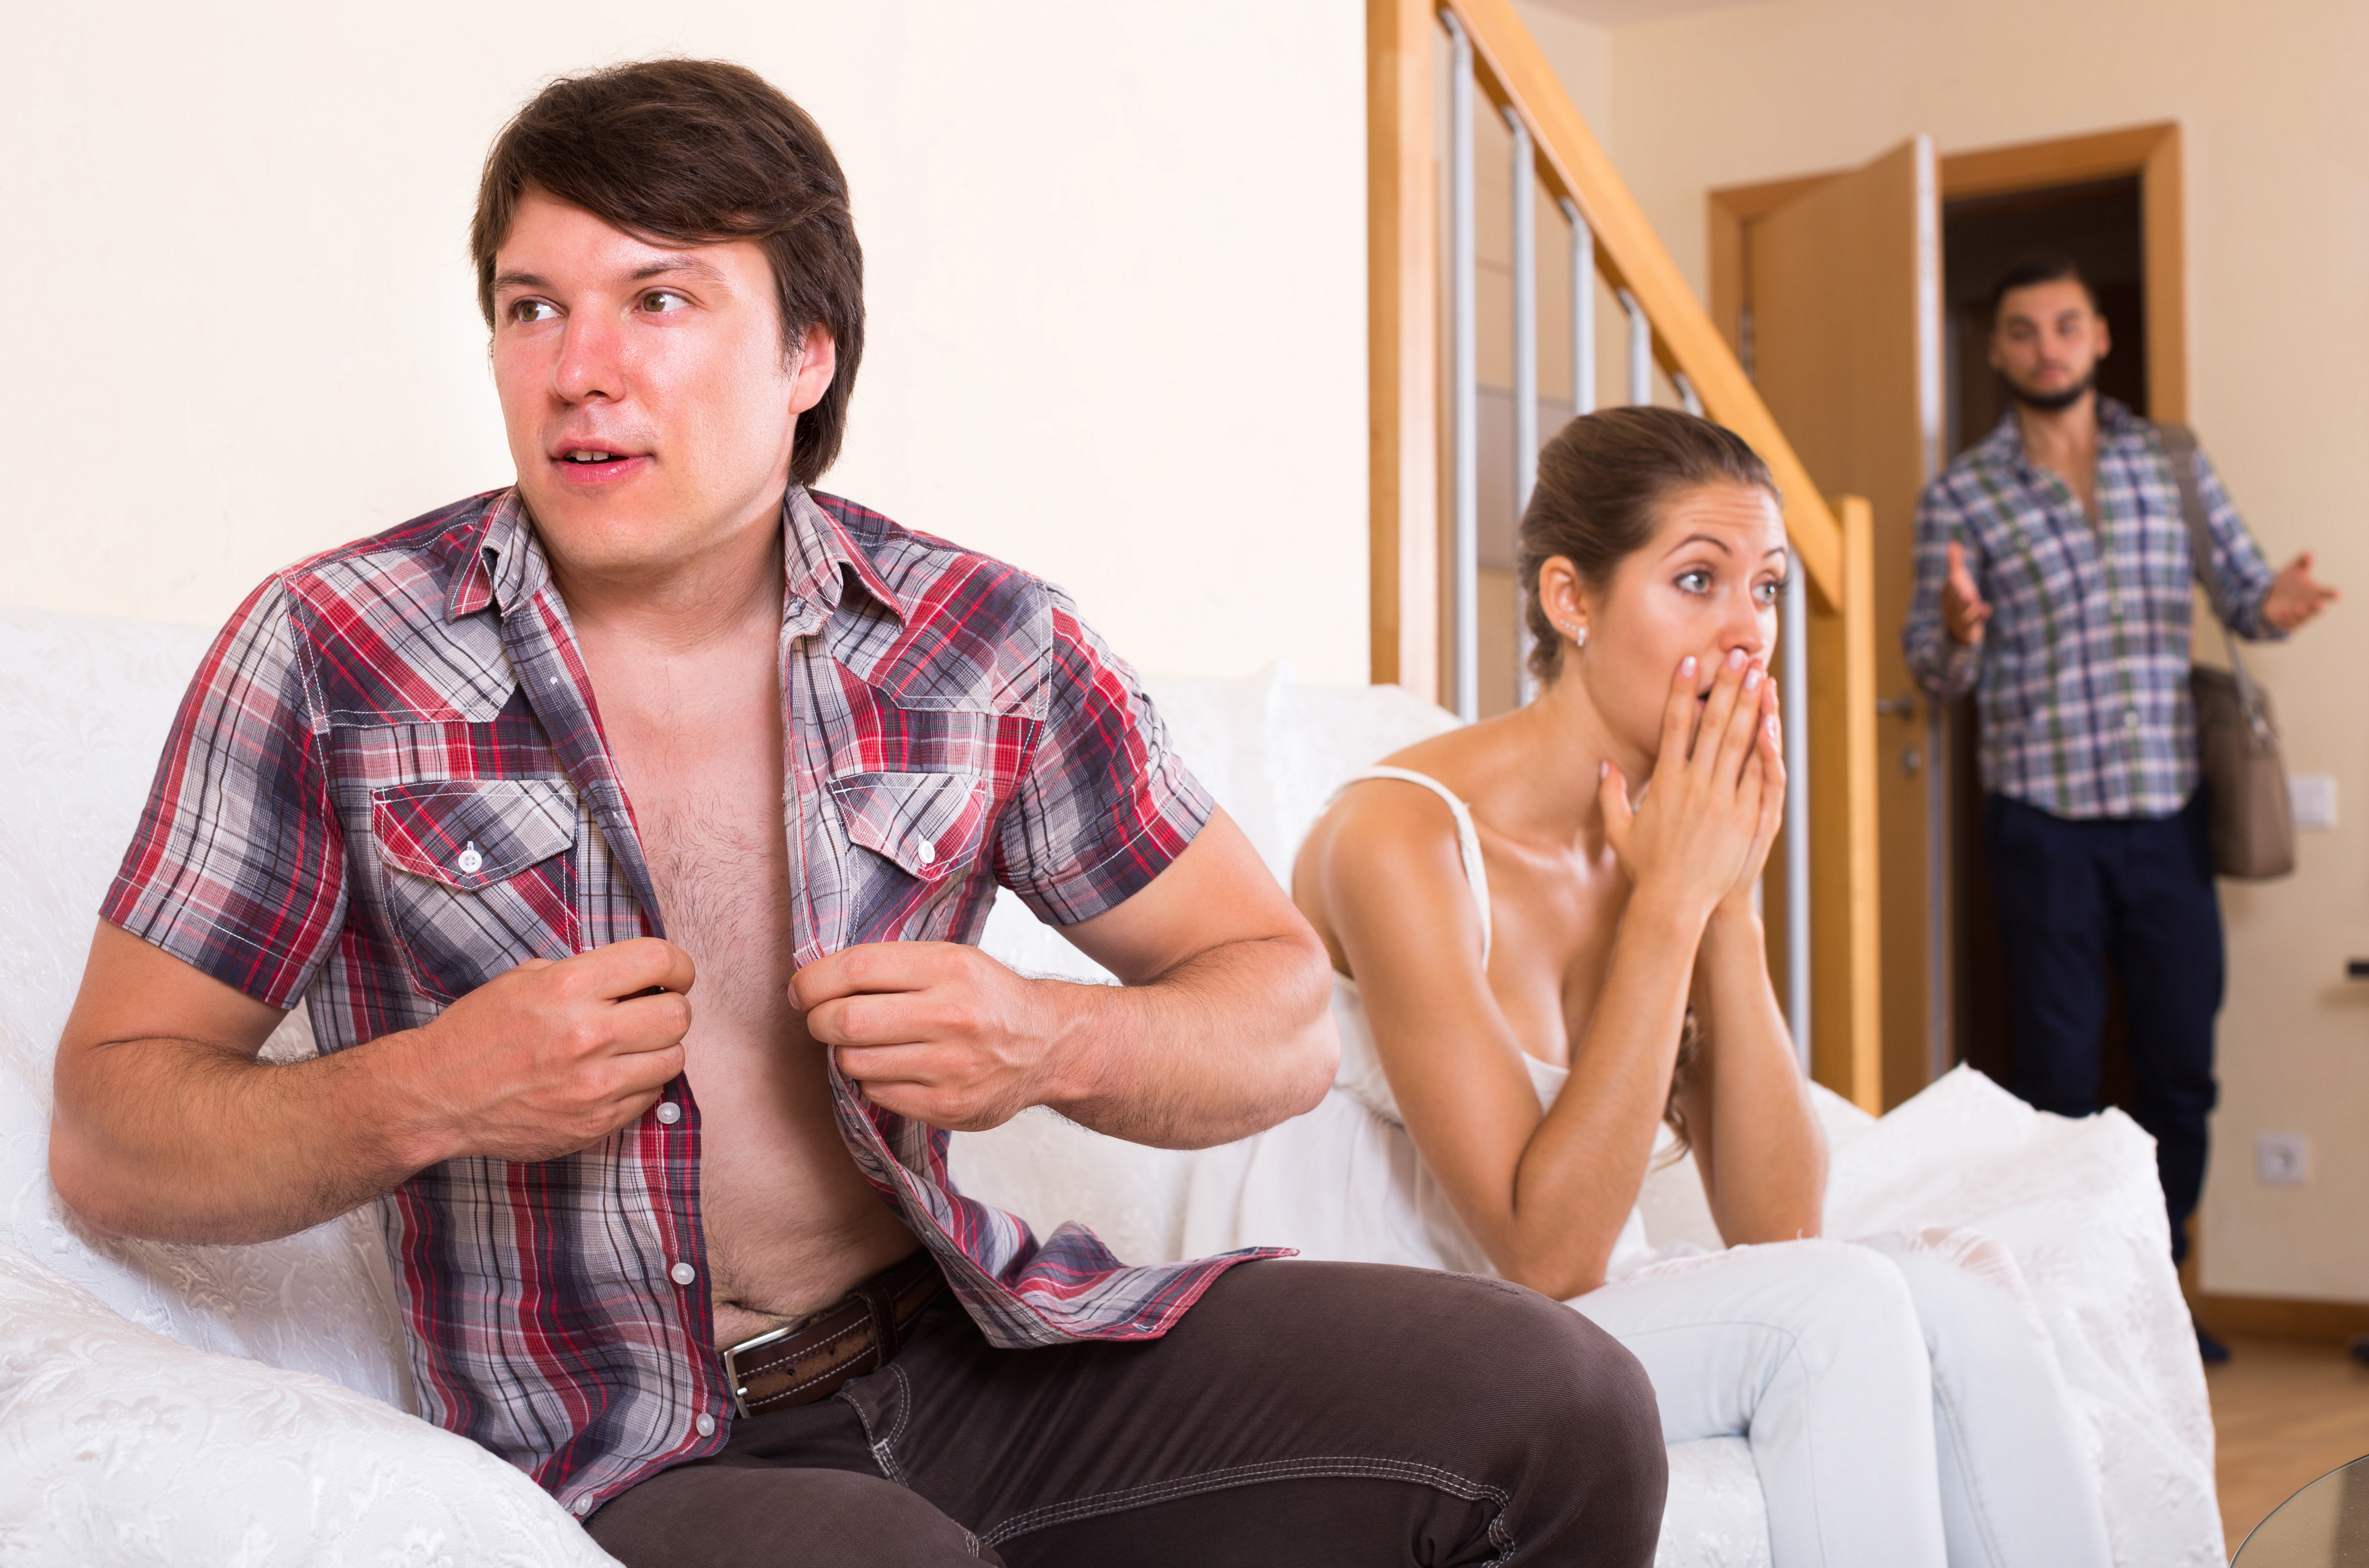 People getting caught having an affair | Source: Shutterstock